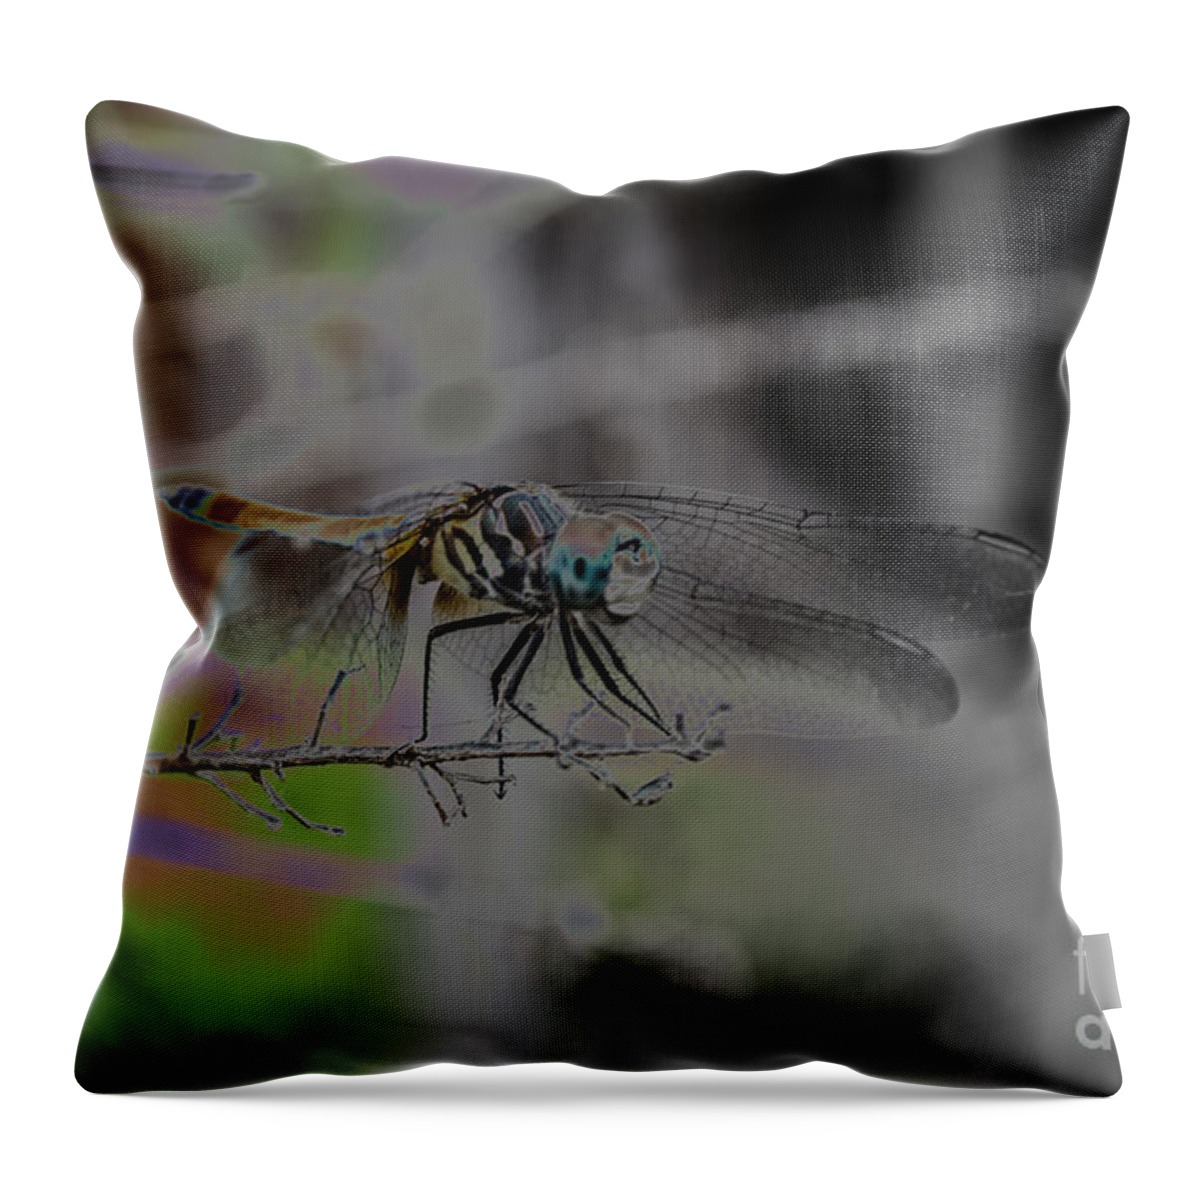 Insect Throw Pillow featuring the photograph Dragonfly by Donna Brown